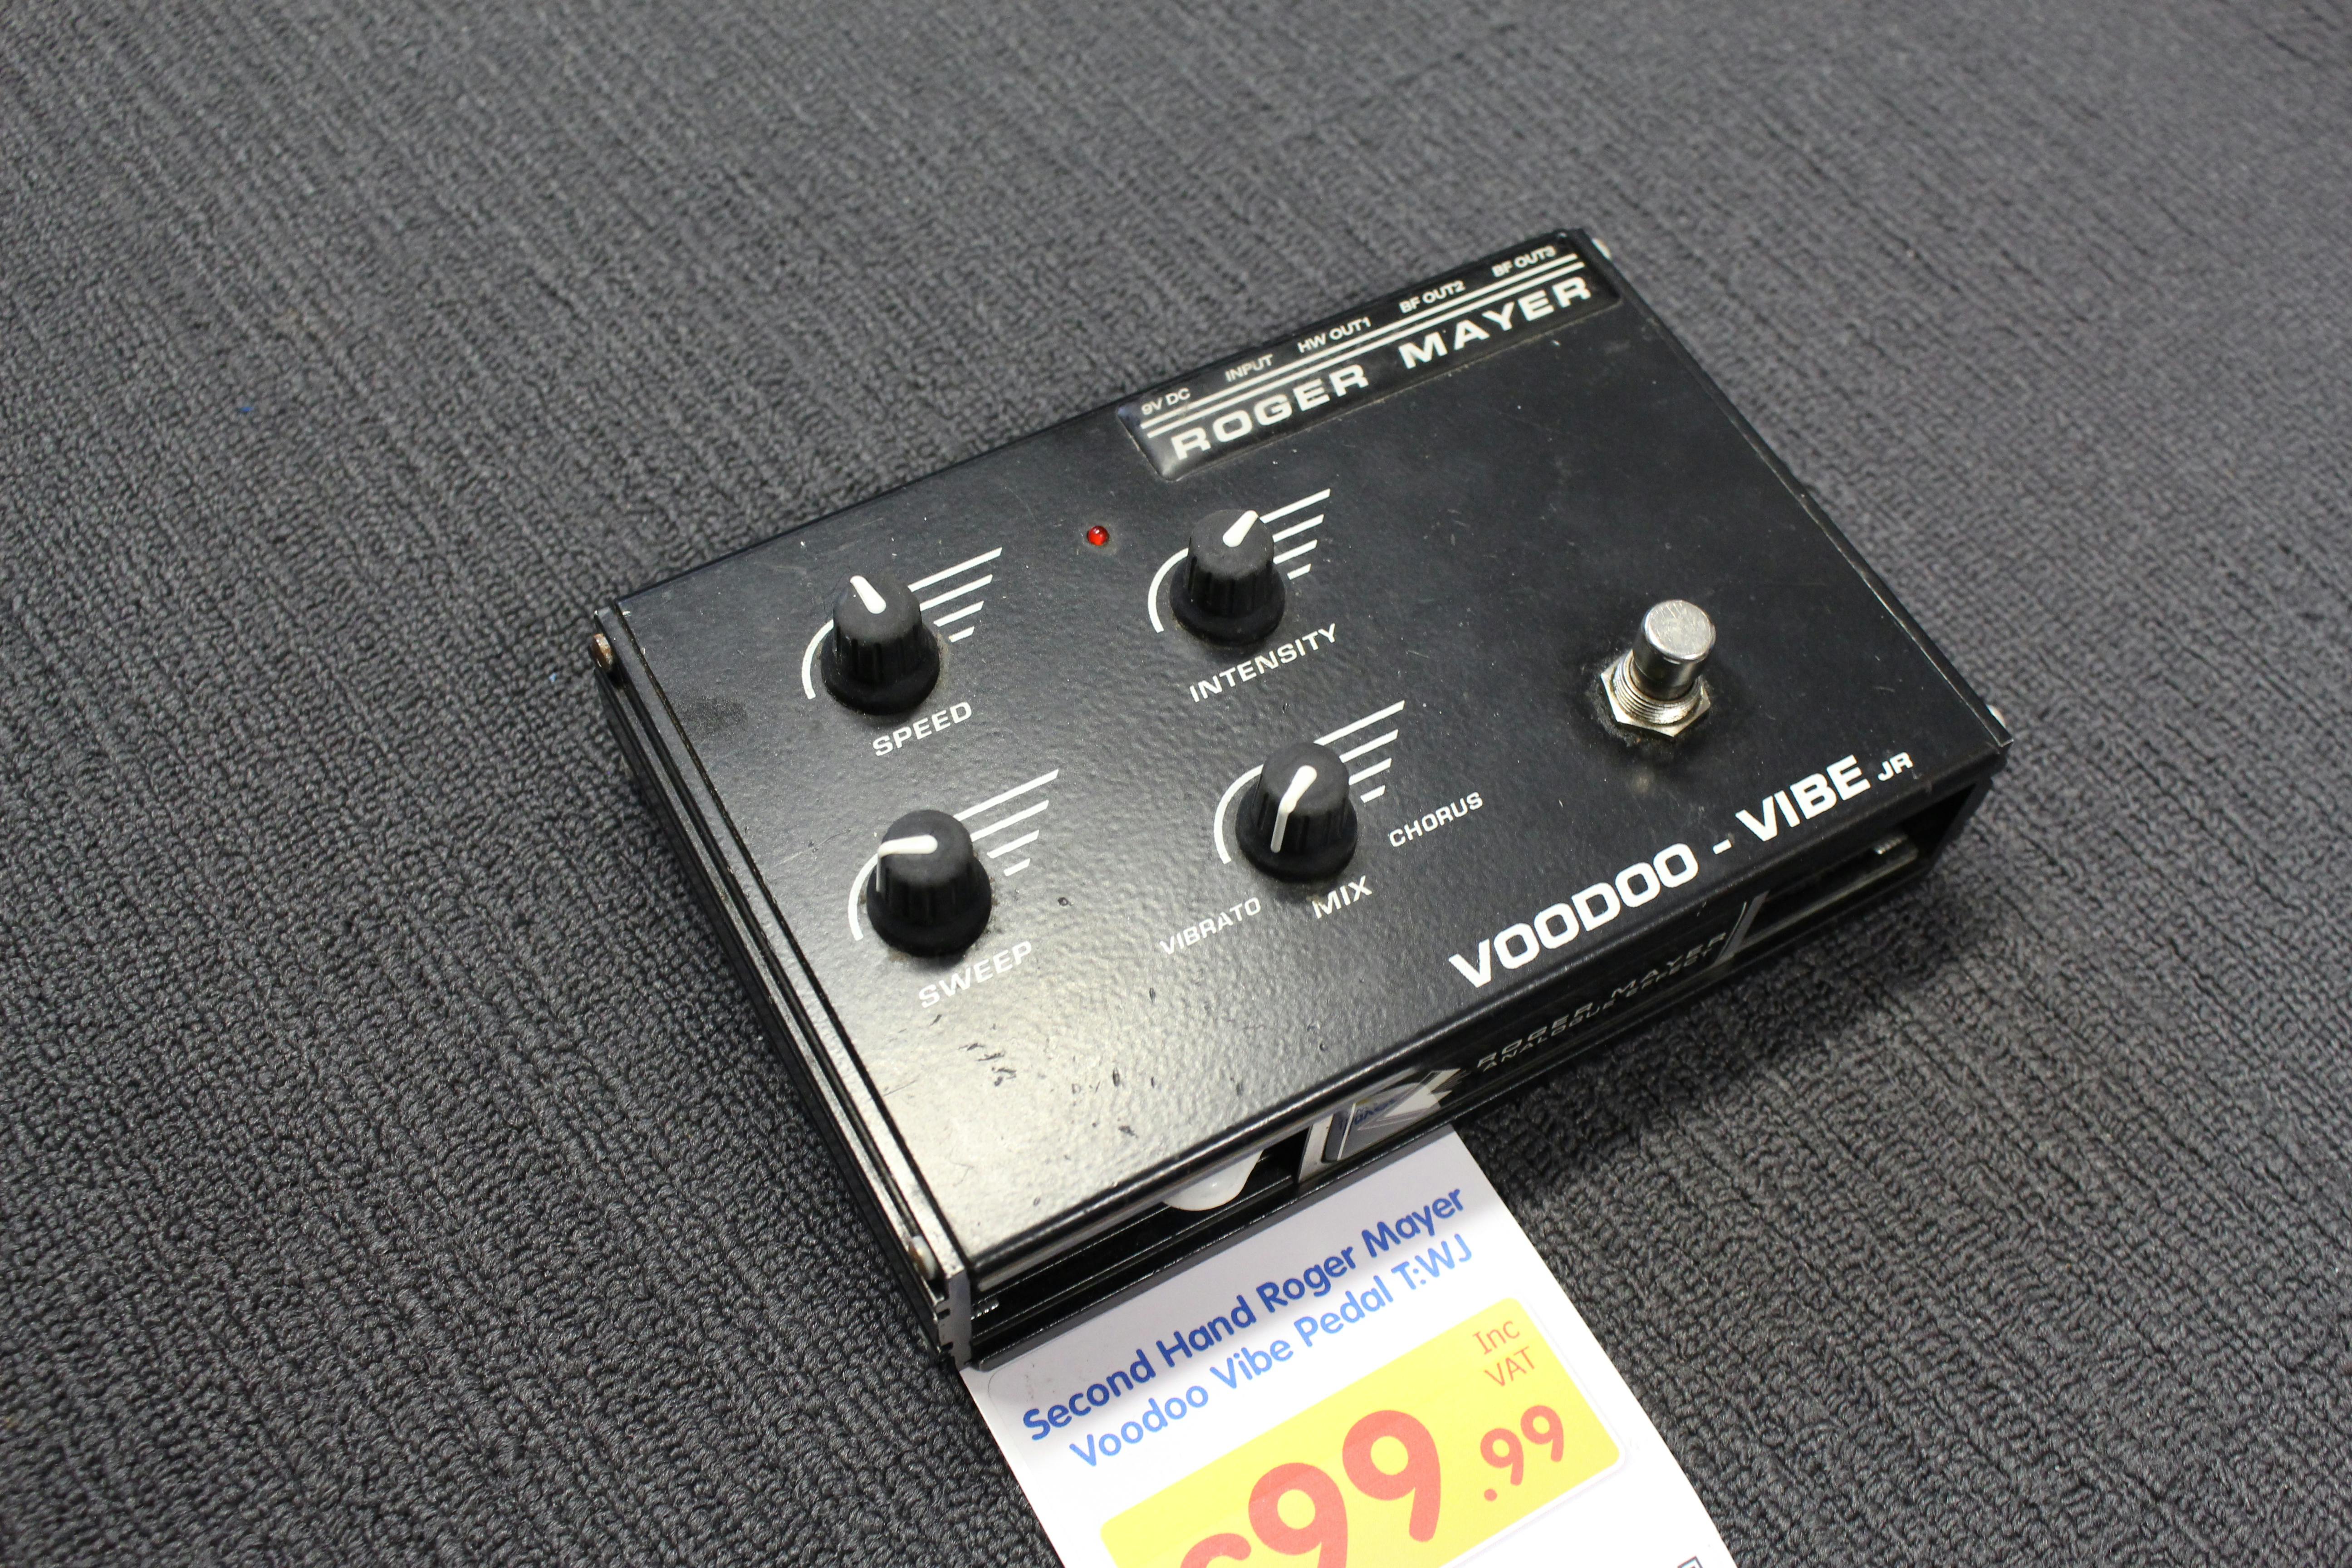 Second Hand Roger Mayer Voodoo Vibe Pedal - Andertons Music Co.